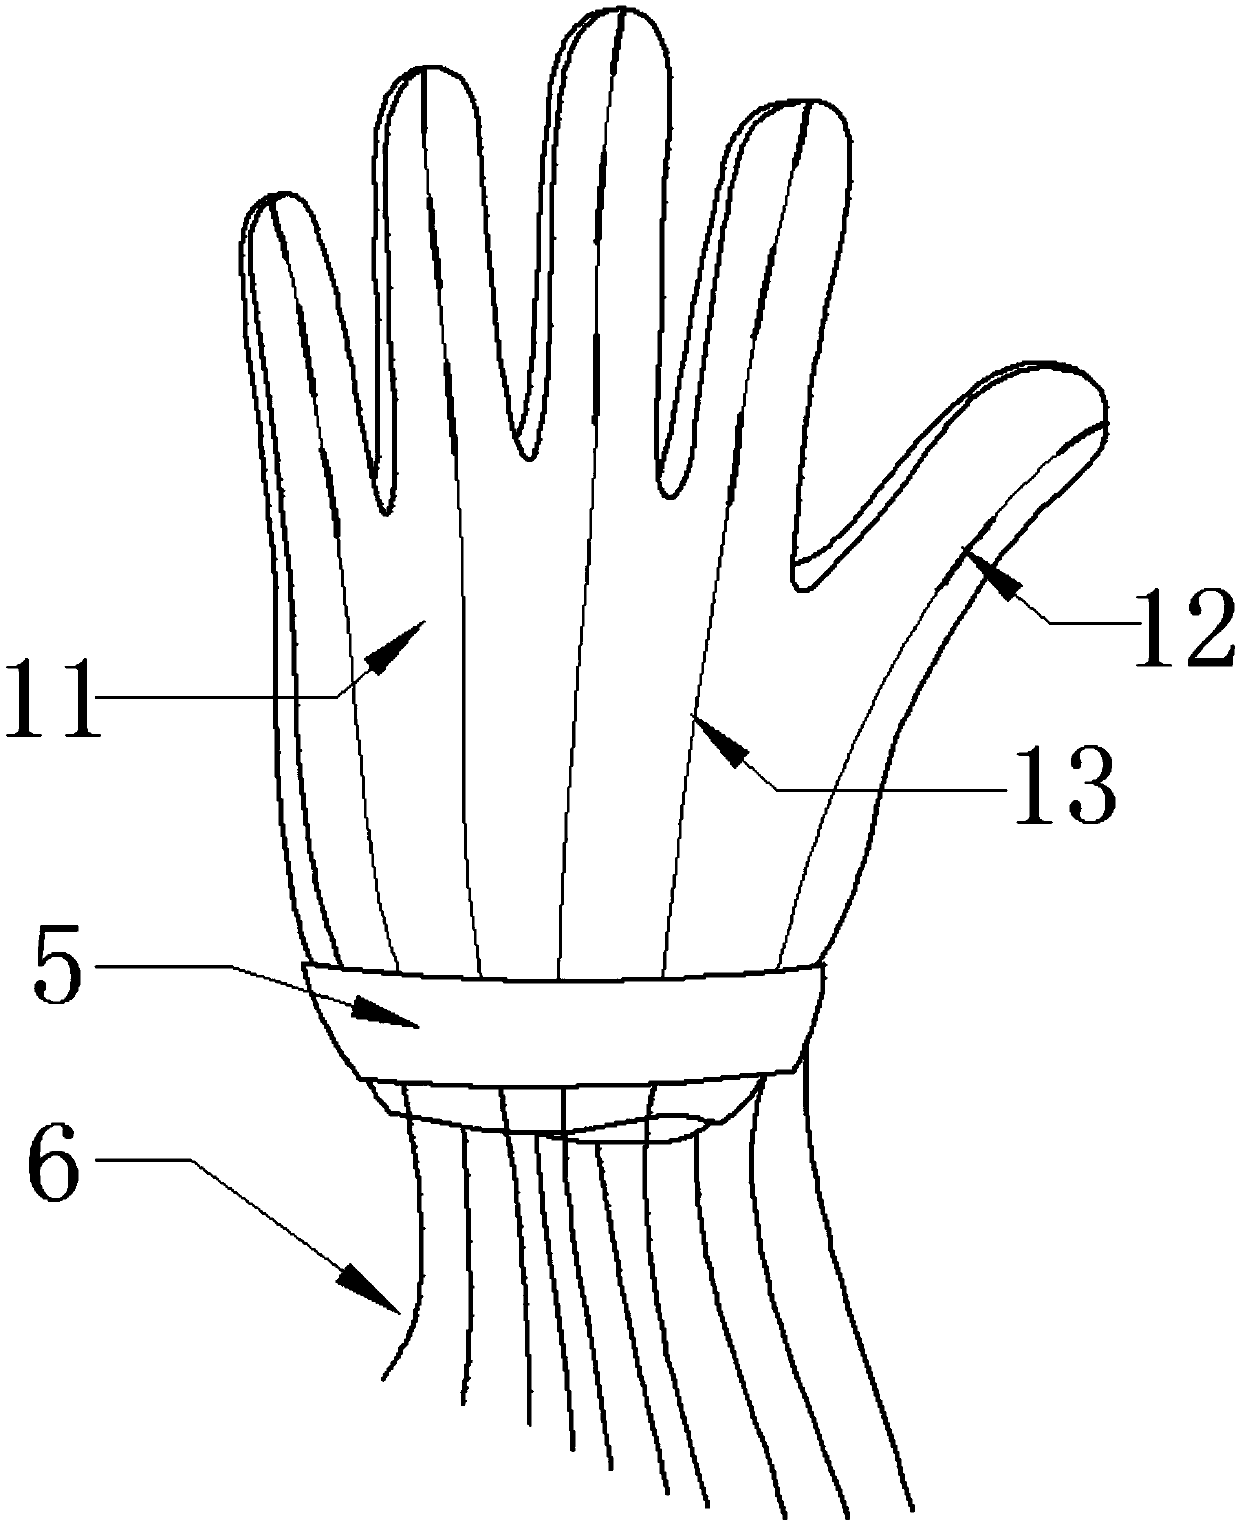 Soft-bodied robot glove for hand movement function recovery